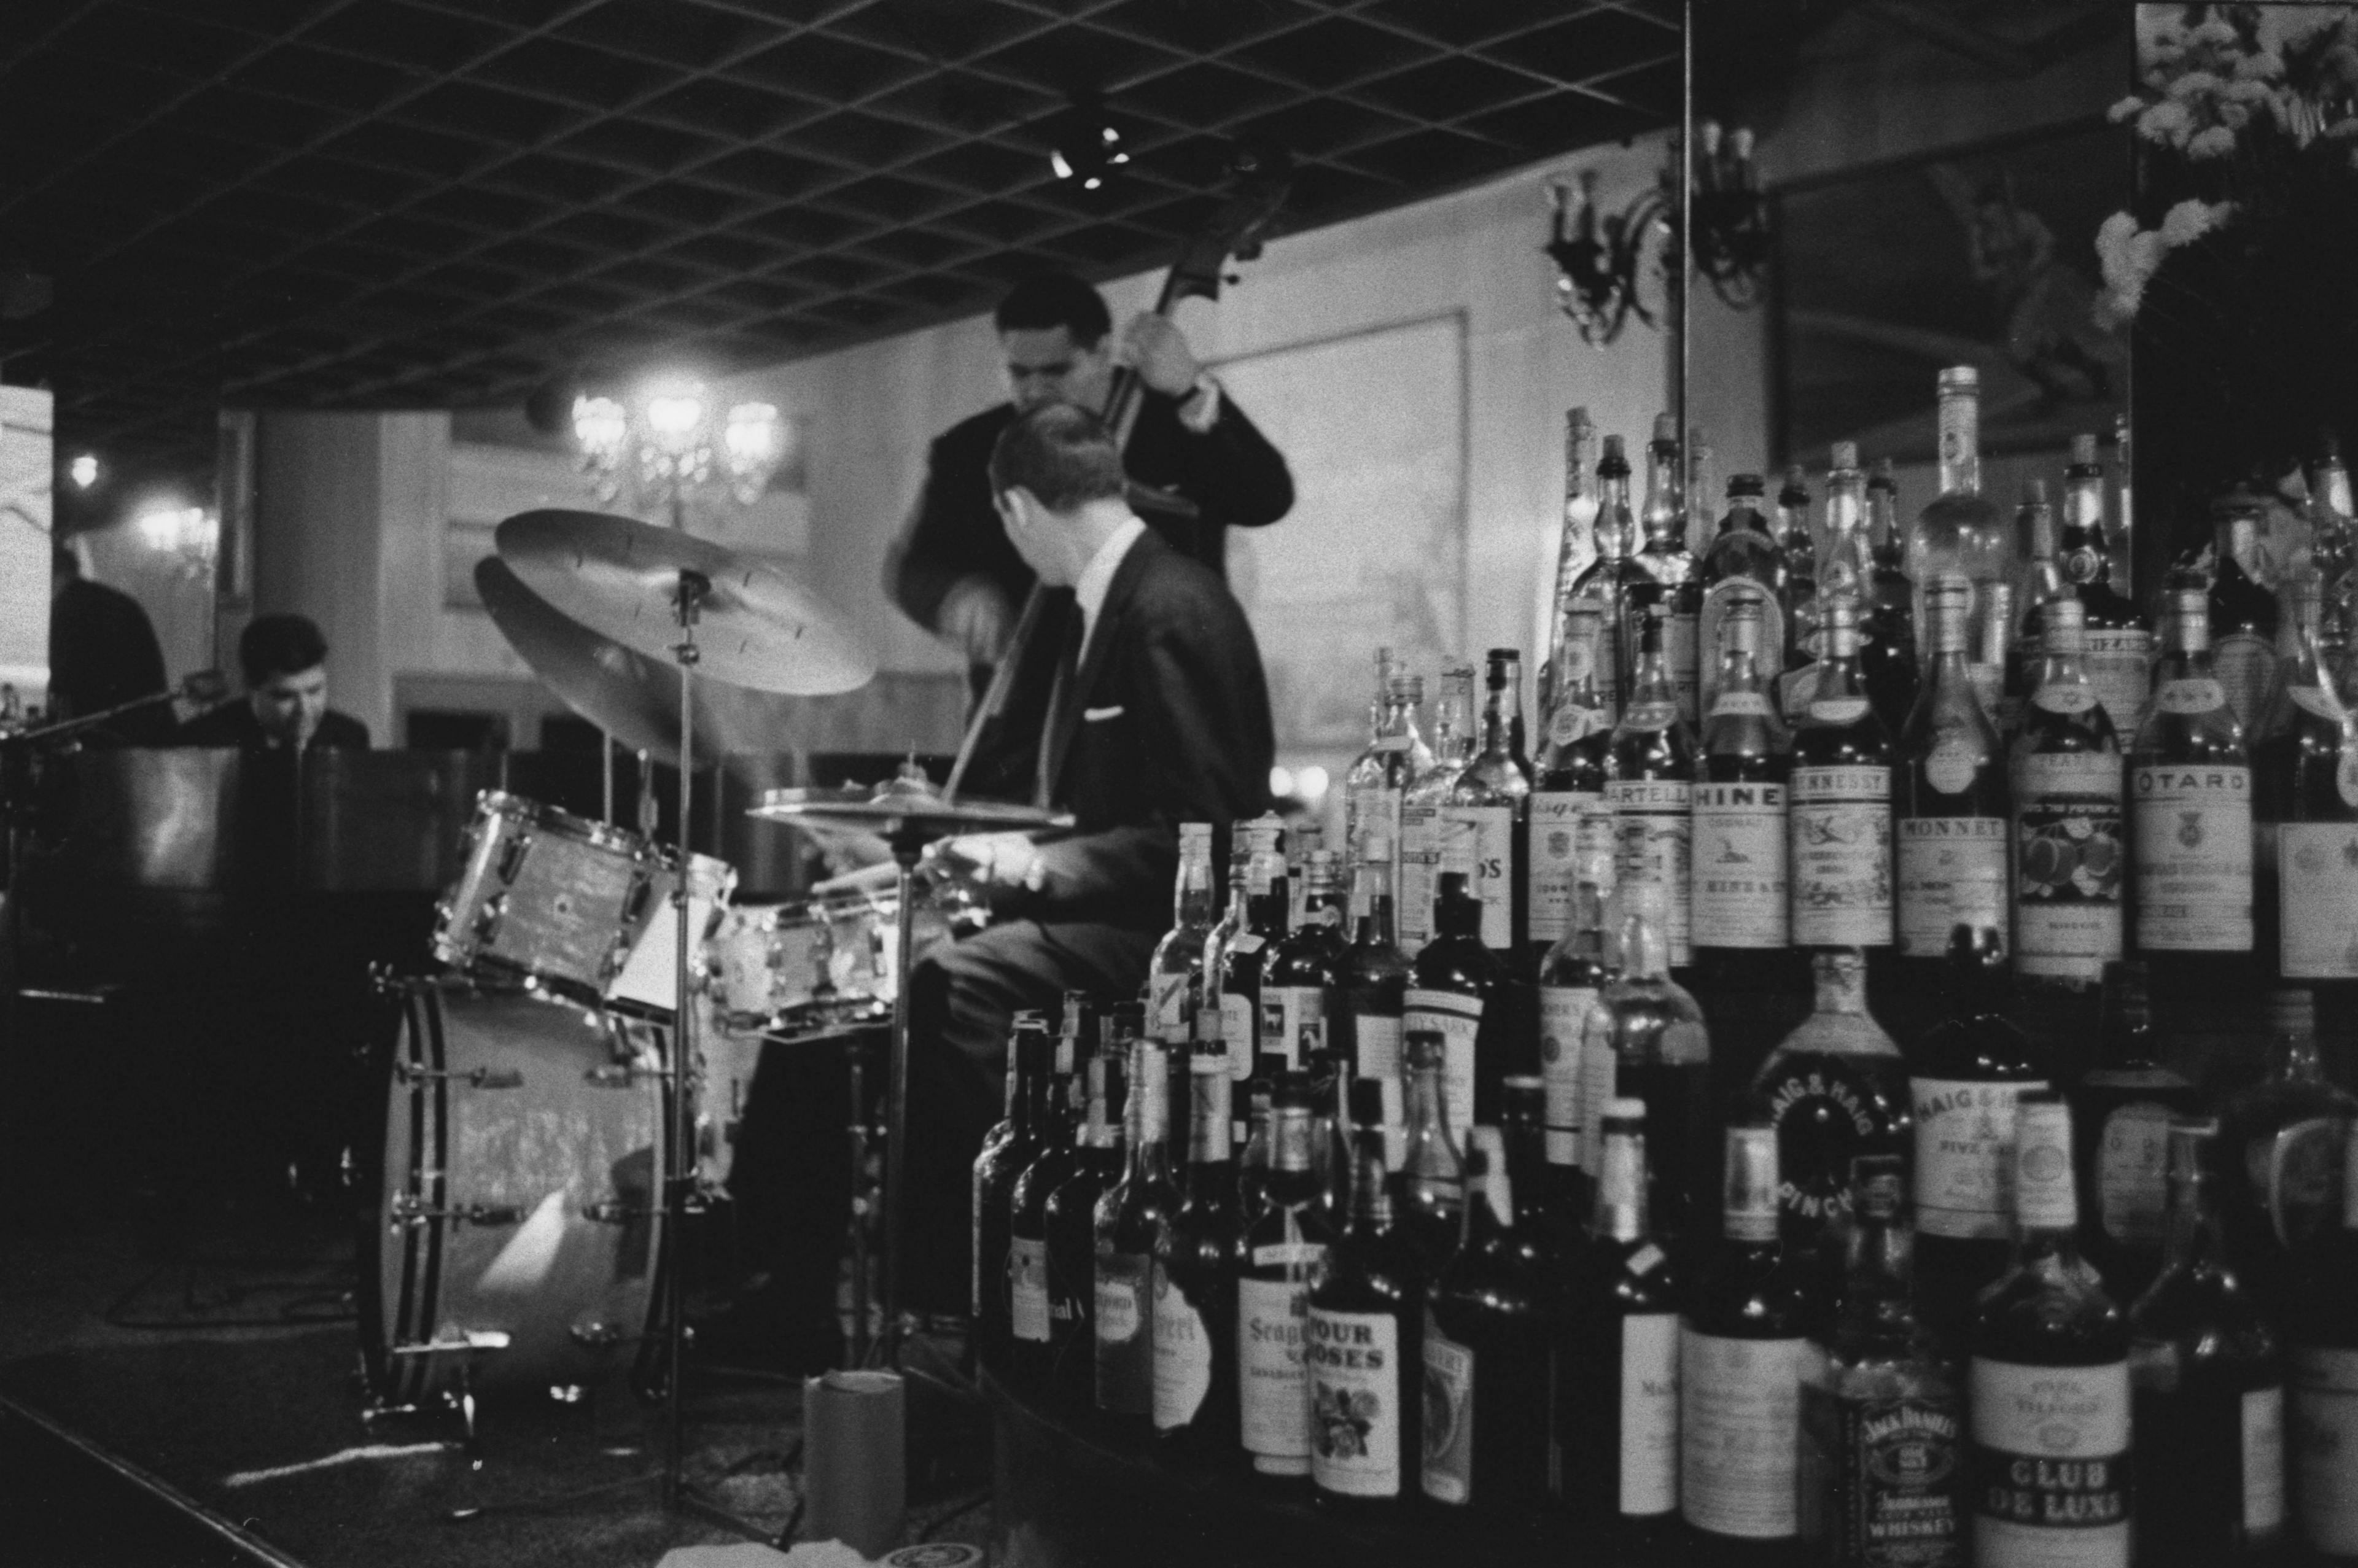 A jazz bar in NYC